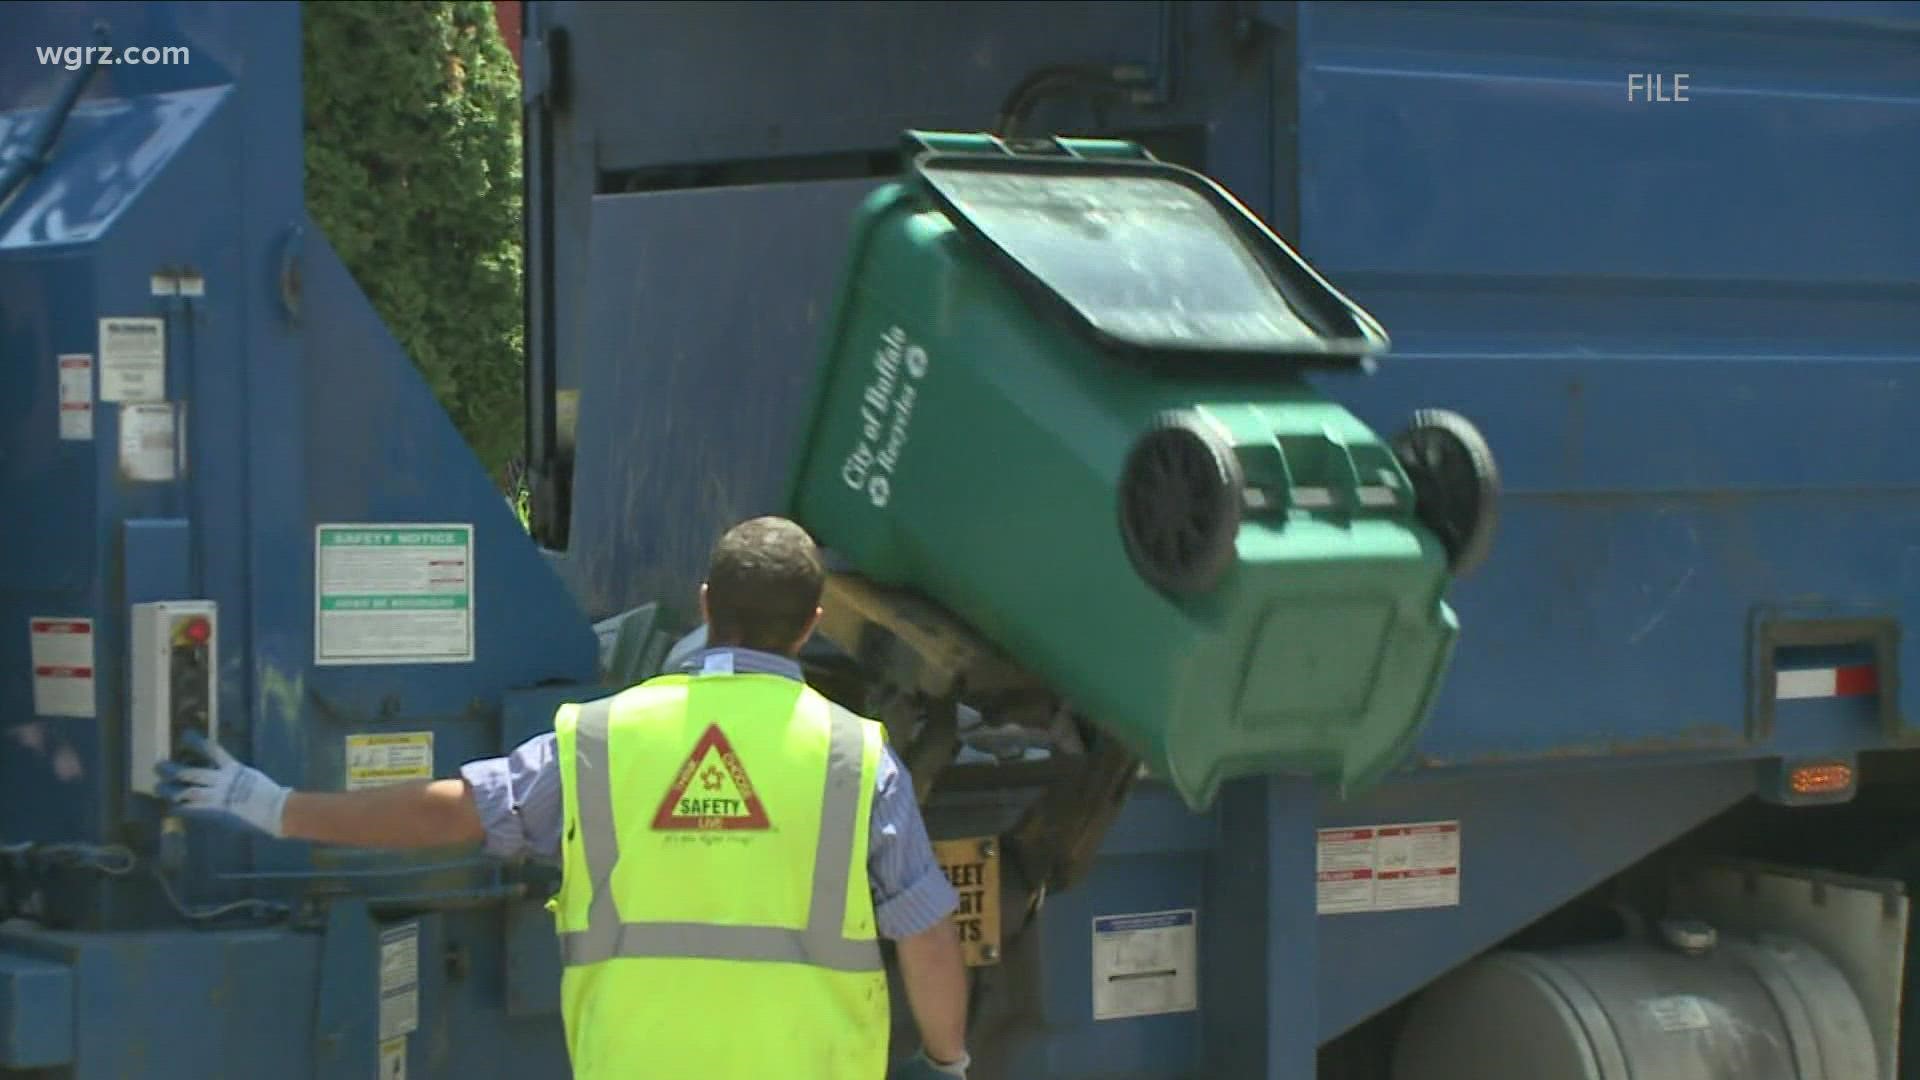 Trash and recycling pickups will be start back up tomorrow and all customers should expect a one day delay